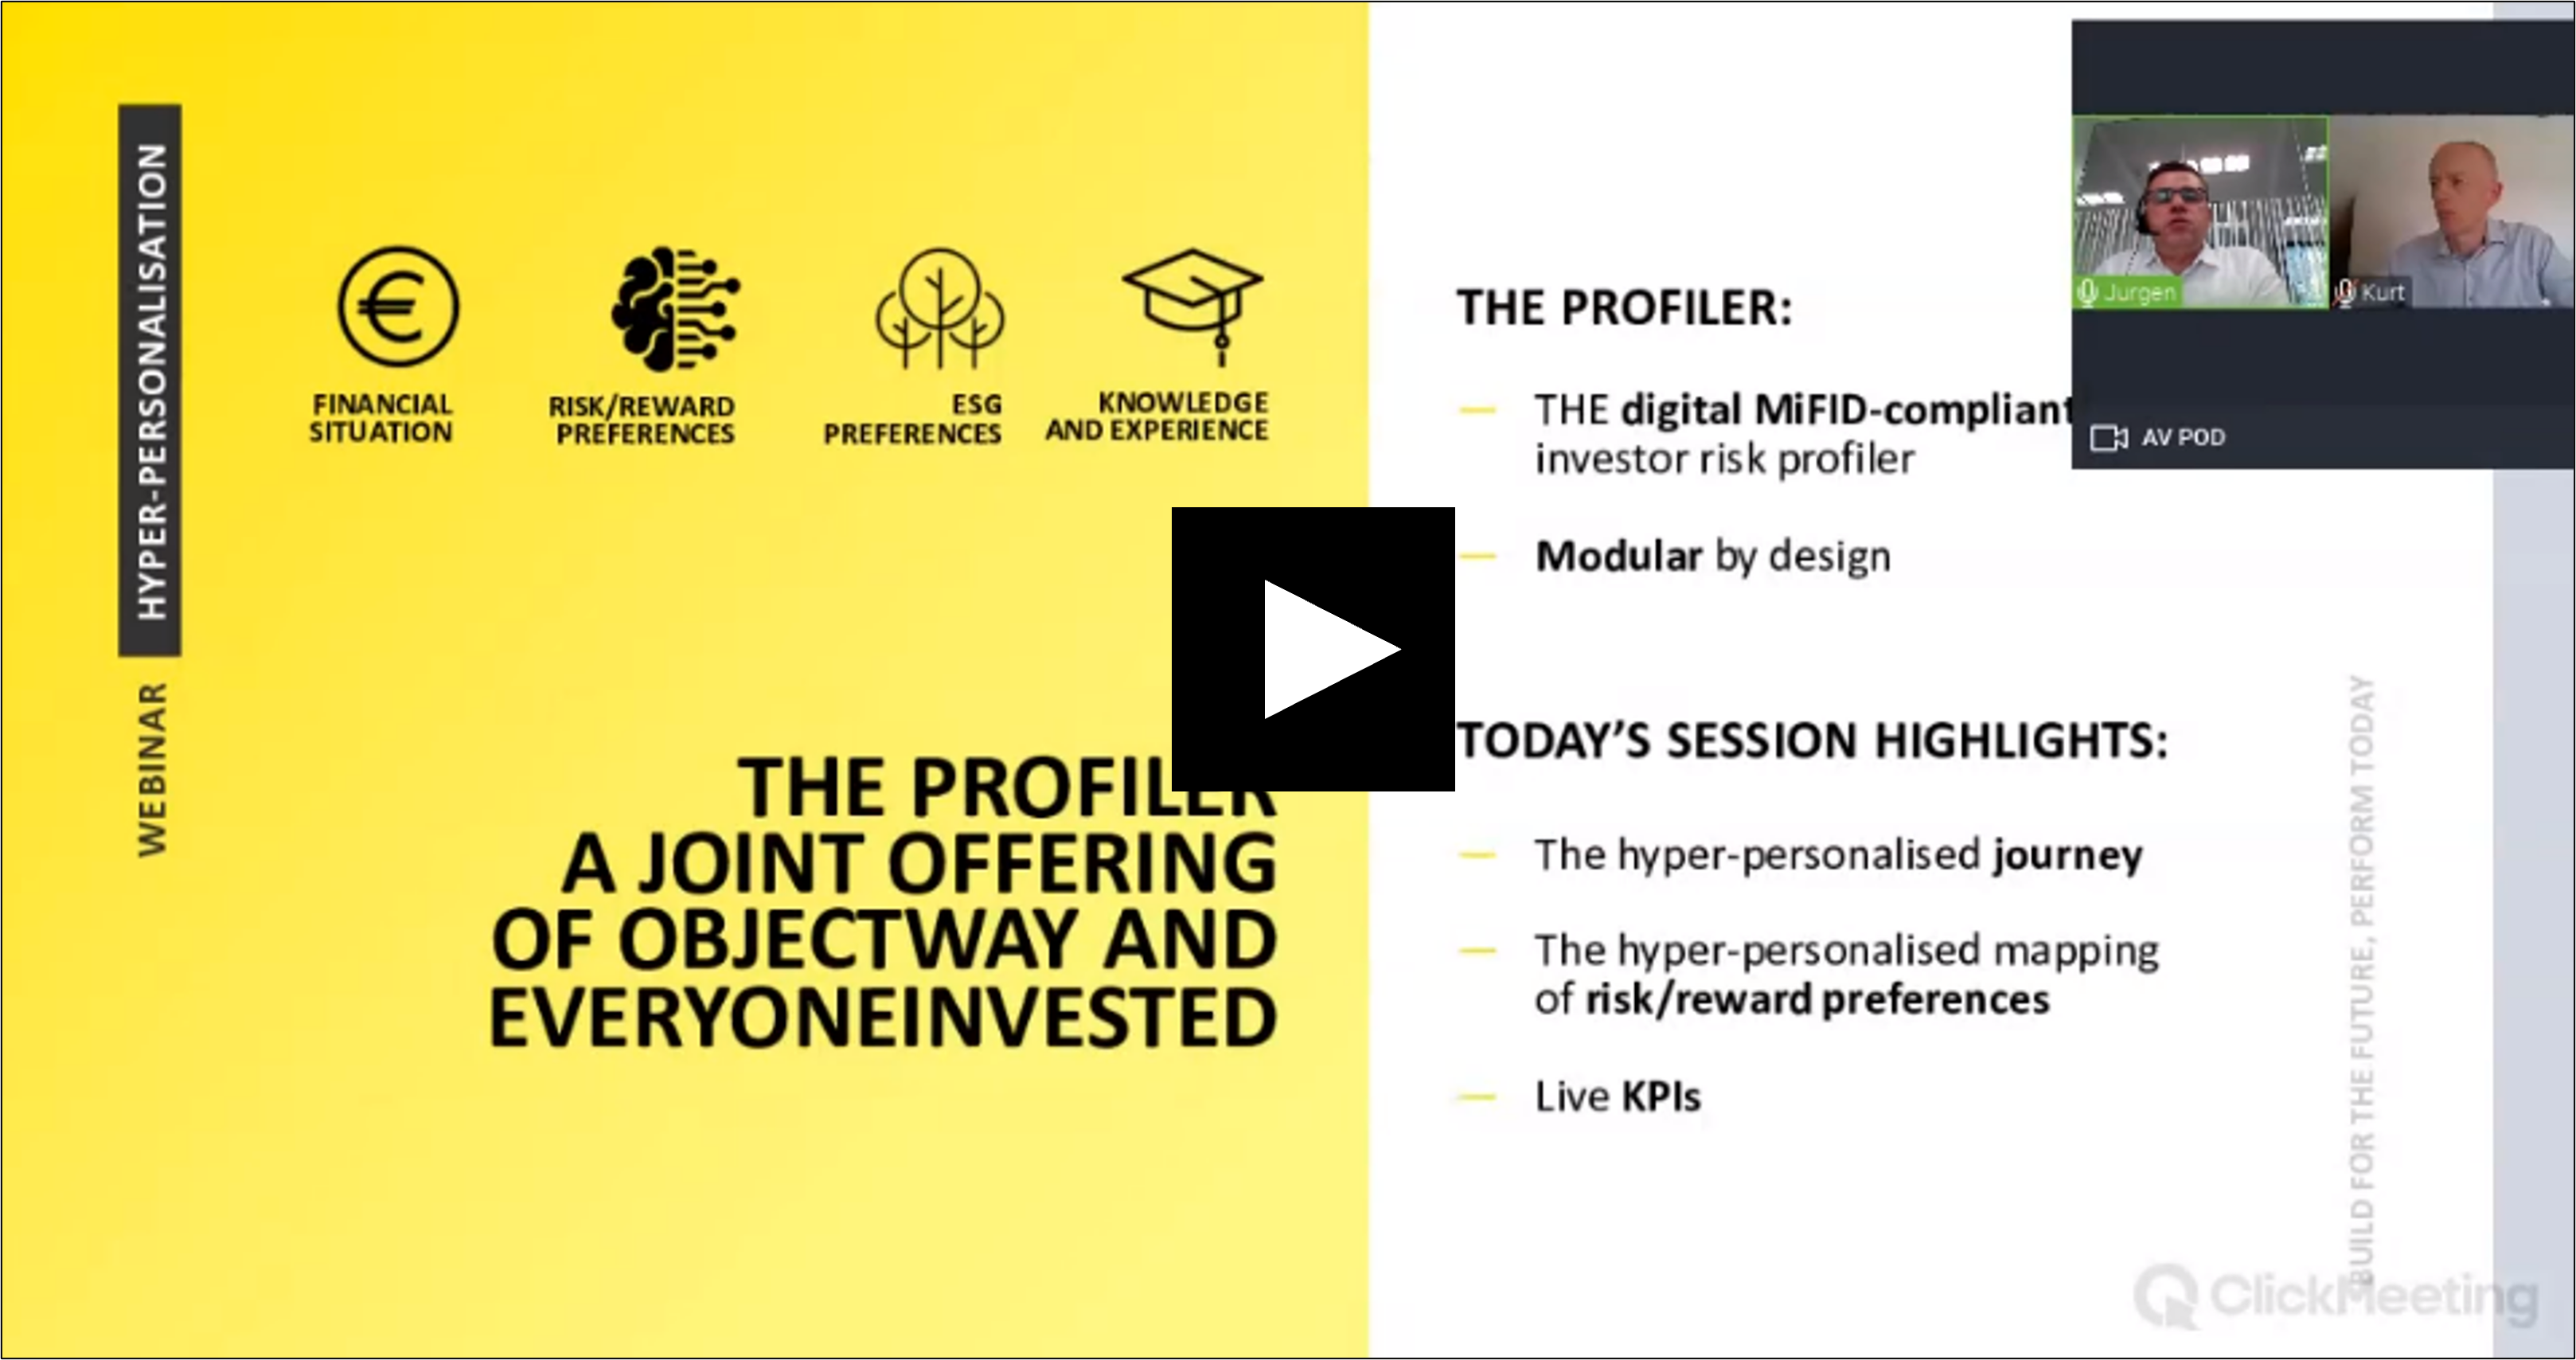 Objectway and EveryoneInvested Webinar Presentation highlighting the hyper-personalised journey